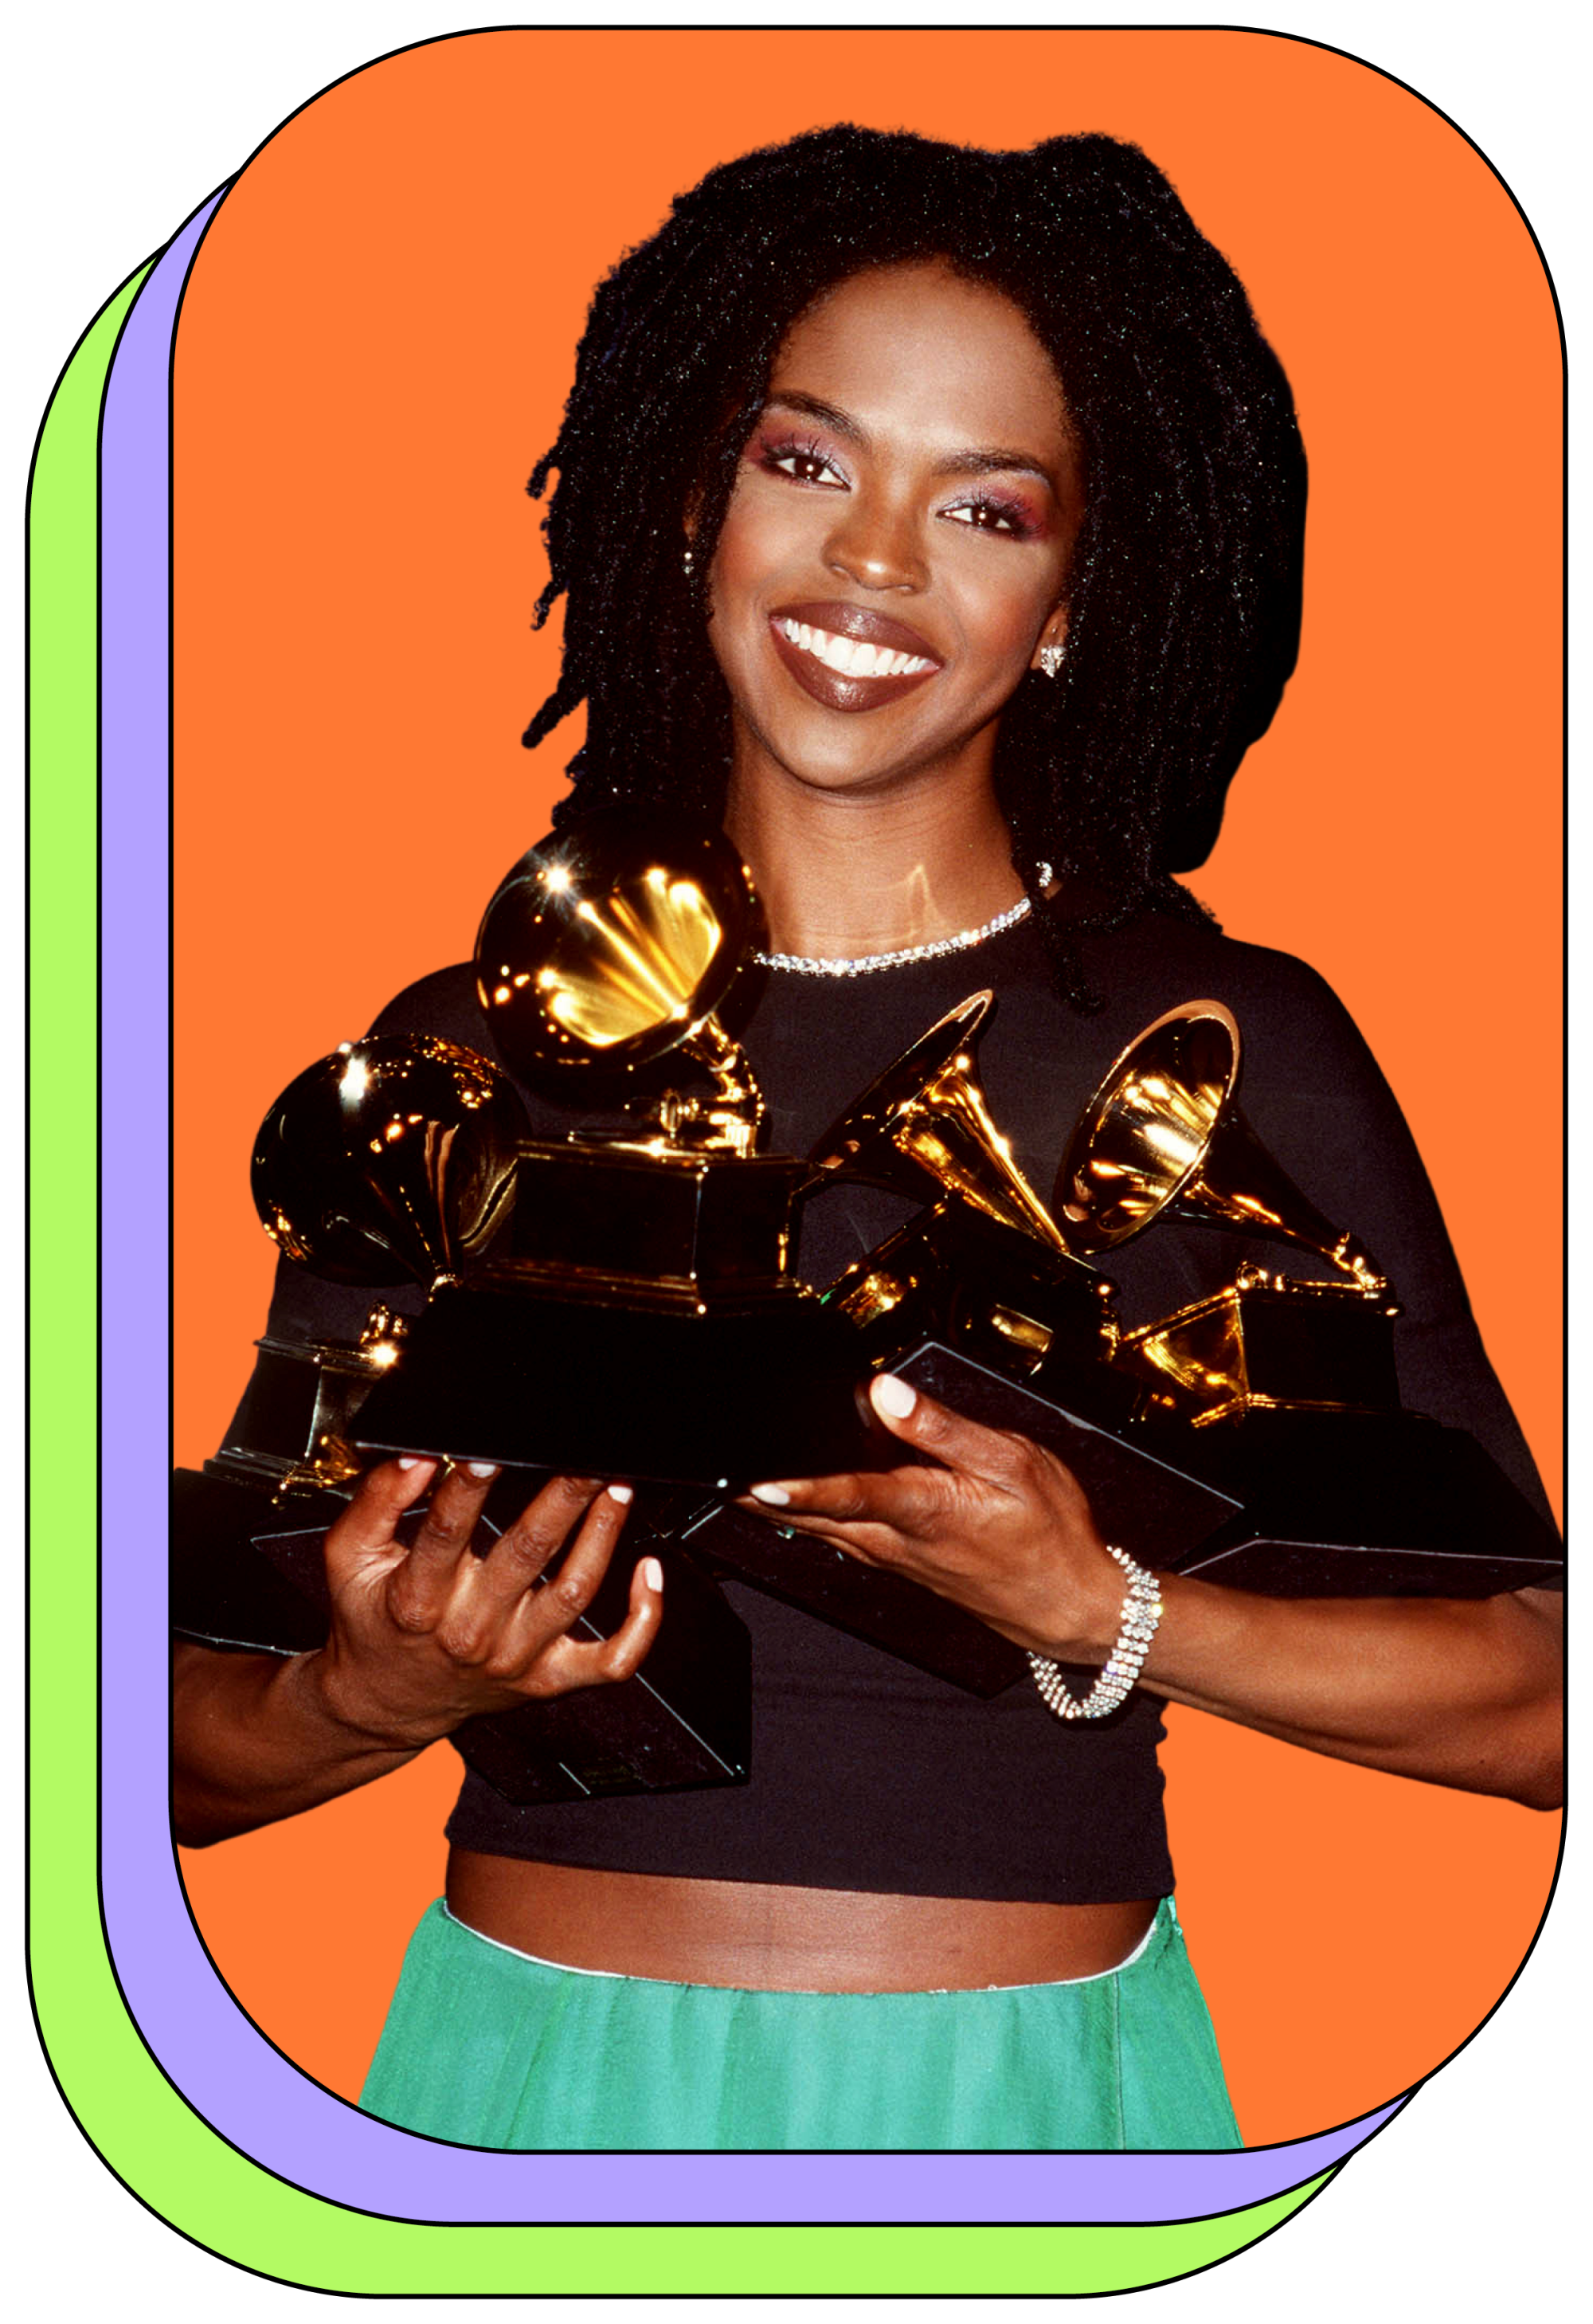 Lauryn Hill at the 1999 Grammy Awards.